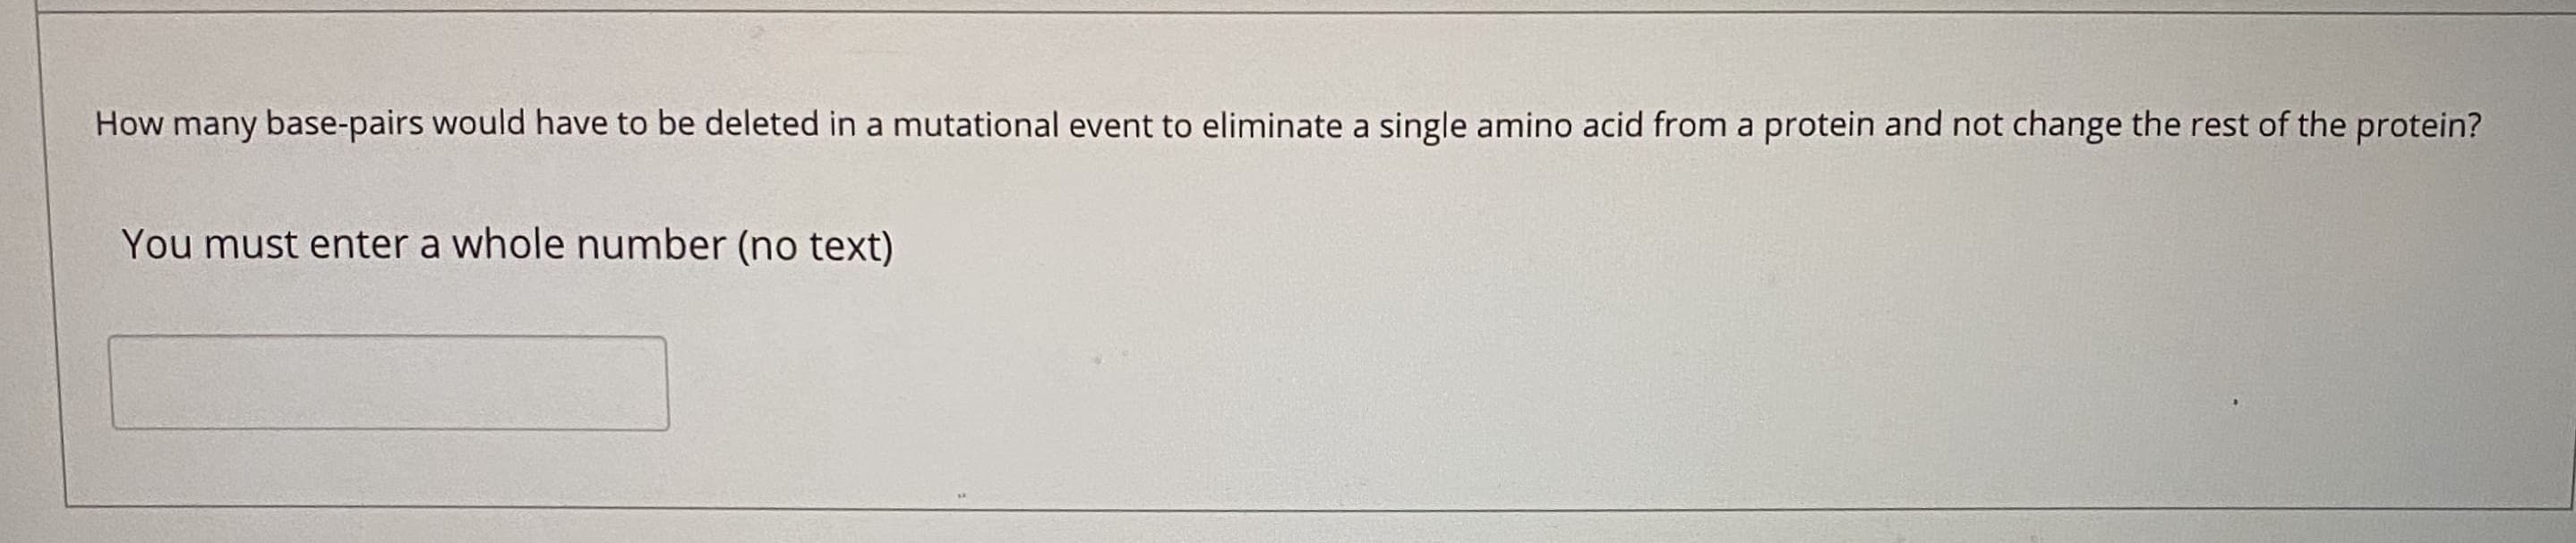 How many base-pairs would have to be deleted in a mutational event to eliminate a single amino acid from a protein and not change the rest of the protein?
You must enter a whole number (no text)
